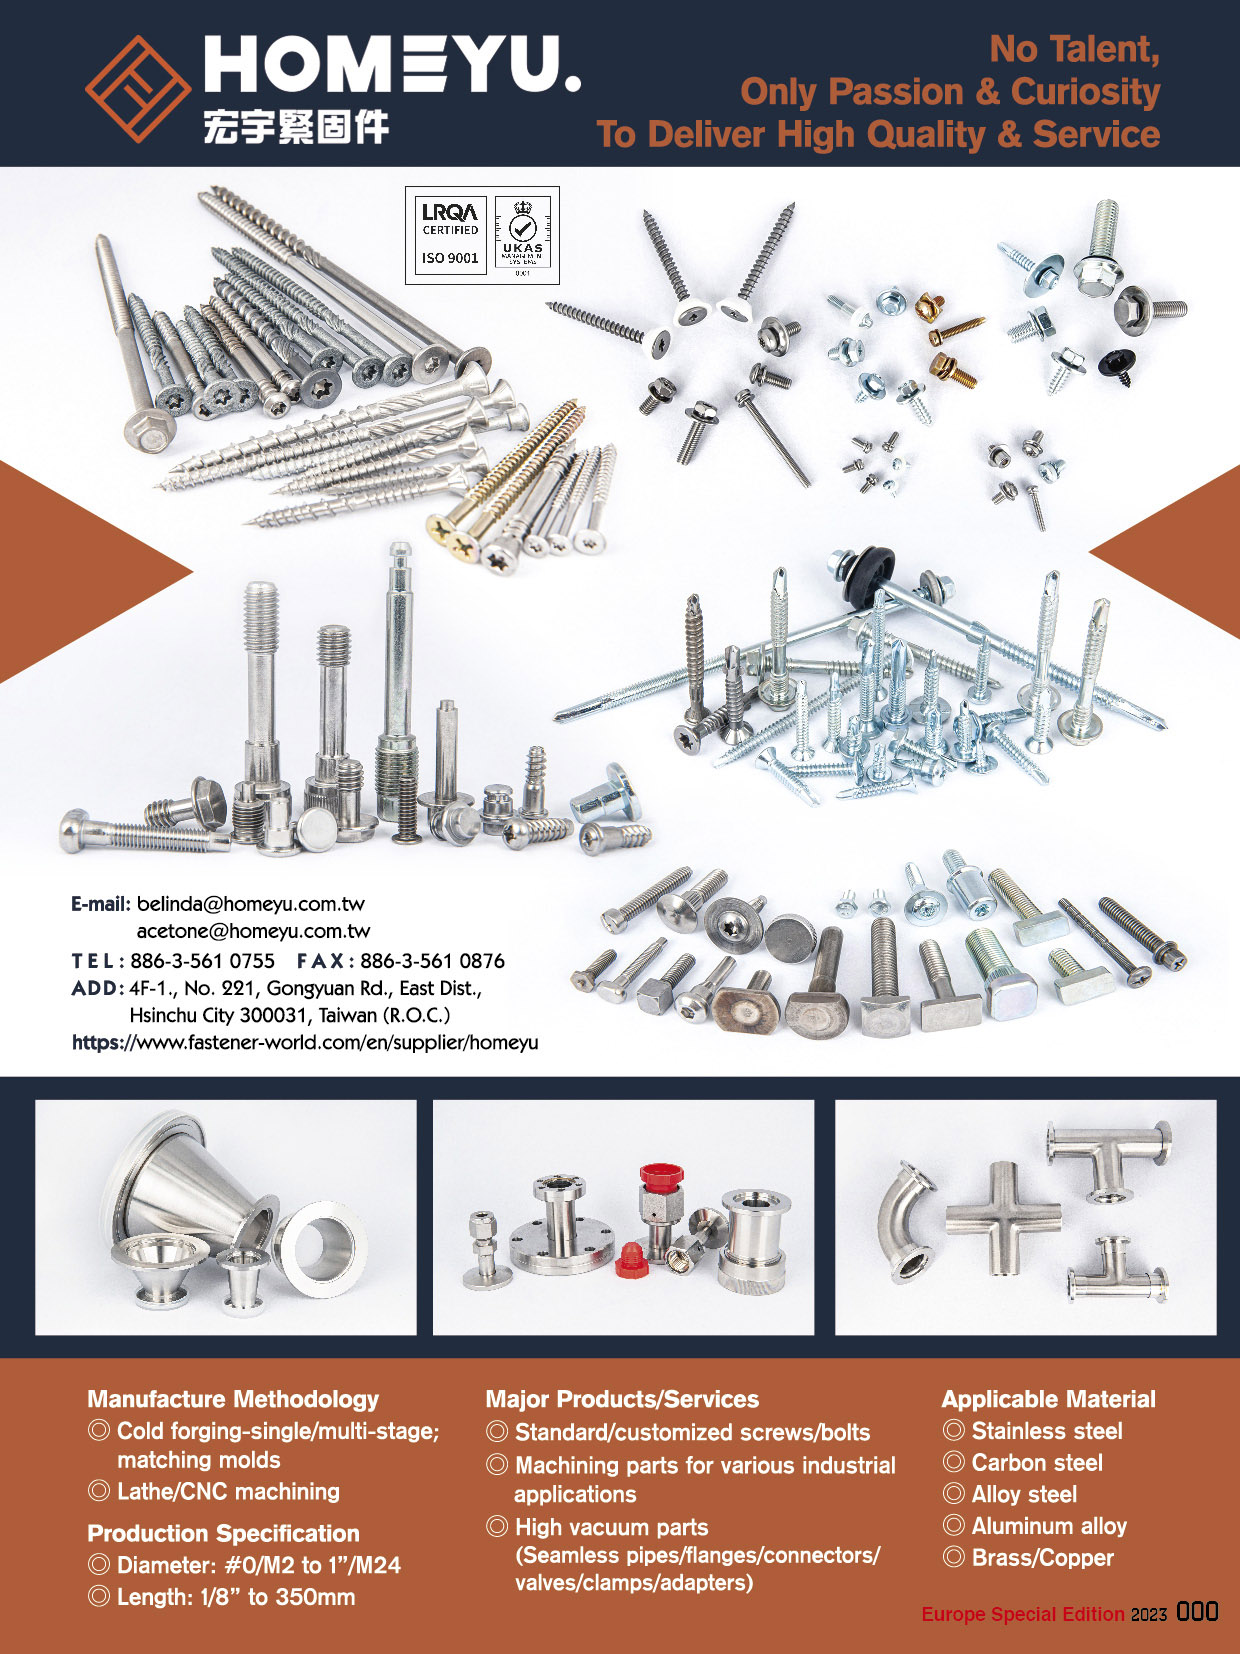 HOMEYU FASTENERS CO., LTD. , Standard/customized screw/bolts, Maching parts for various industrial application, High Vacuum parts (Seamless pipes/flange/connector/valve/clamps/adapter)